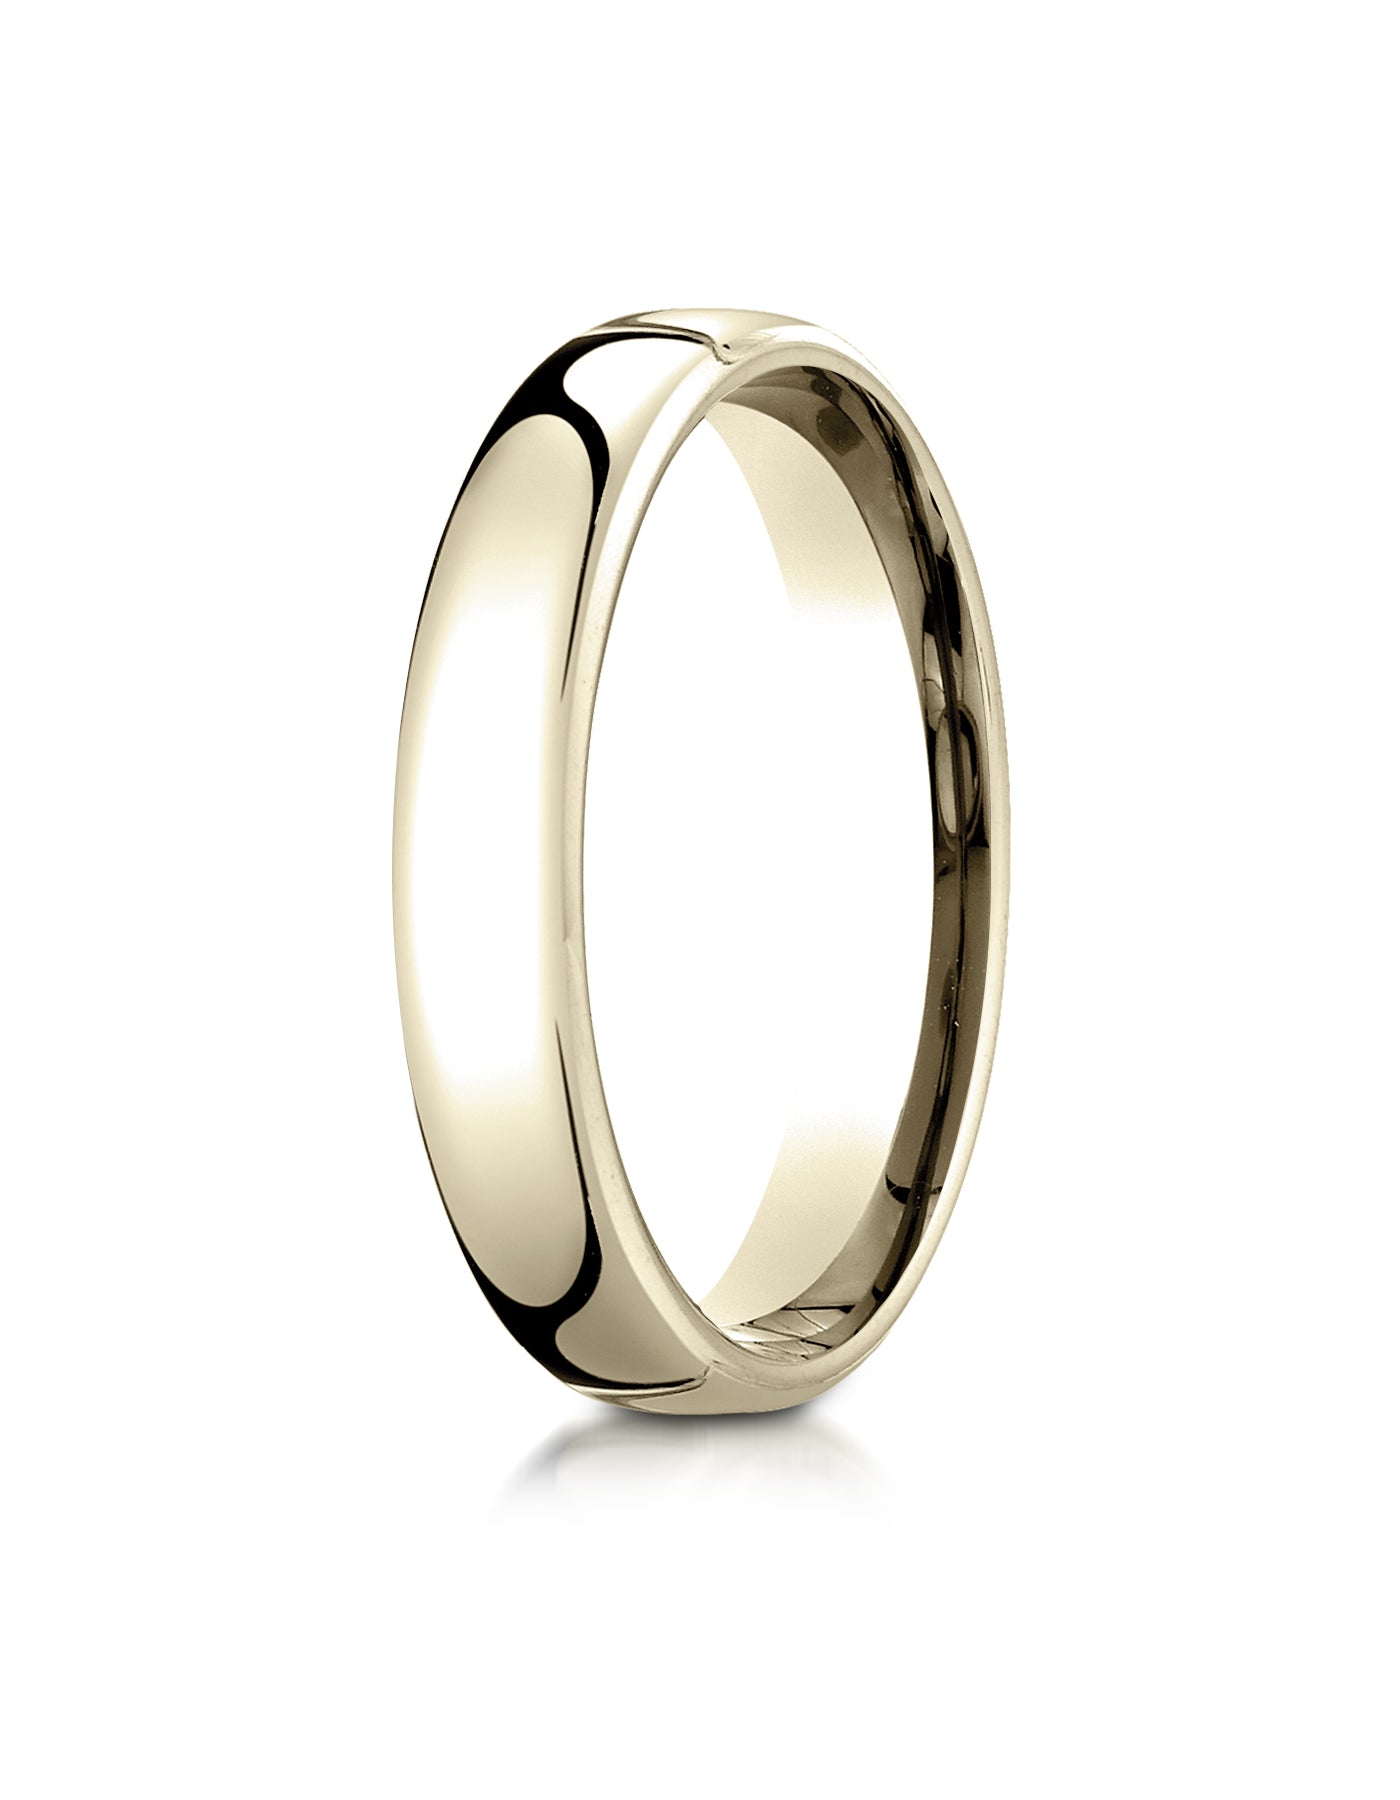 Benchmark 14K Yellow Gold 4.5mm European Comfort-Fit Wedding Band Ring,  Size 4.25